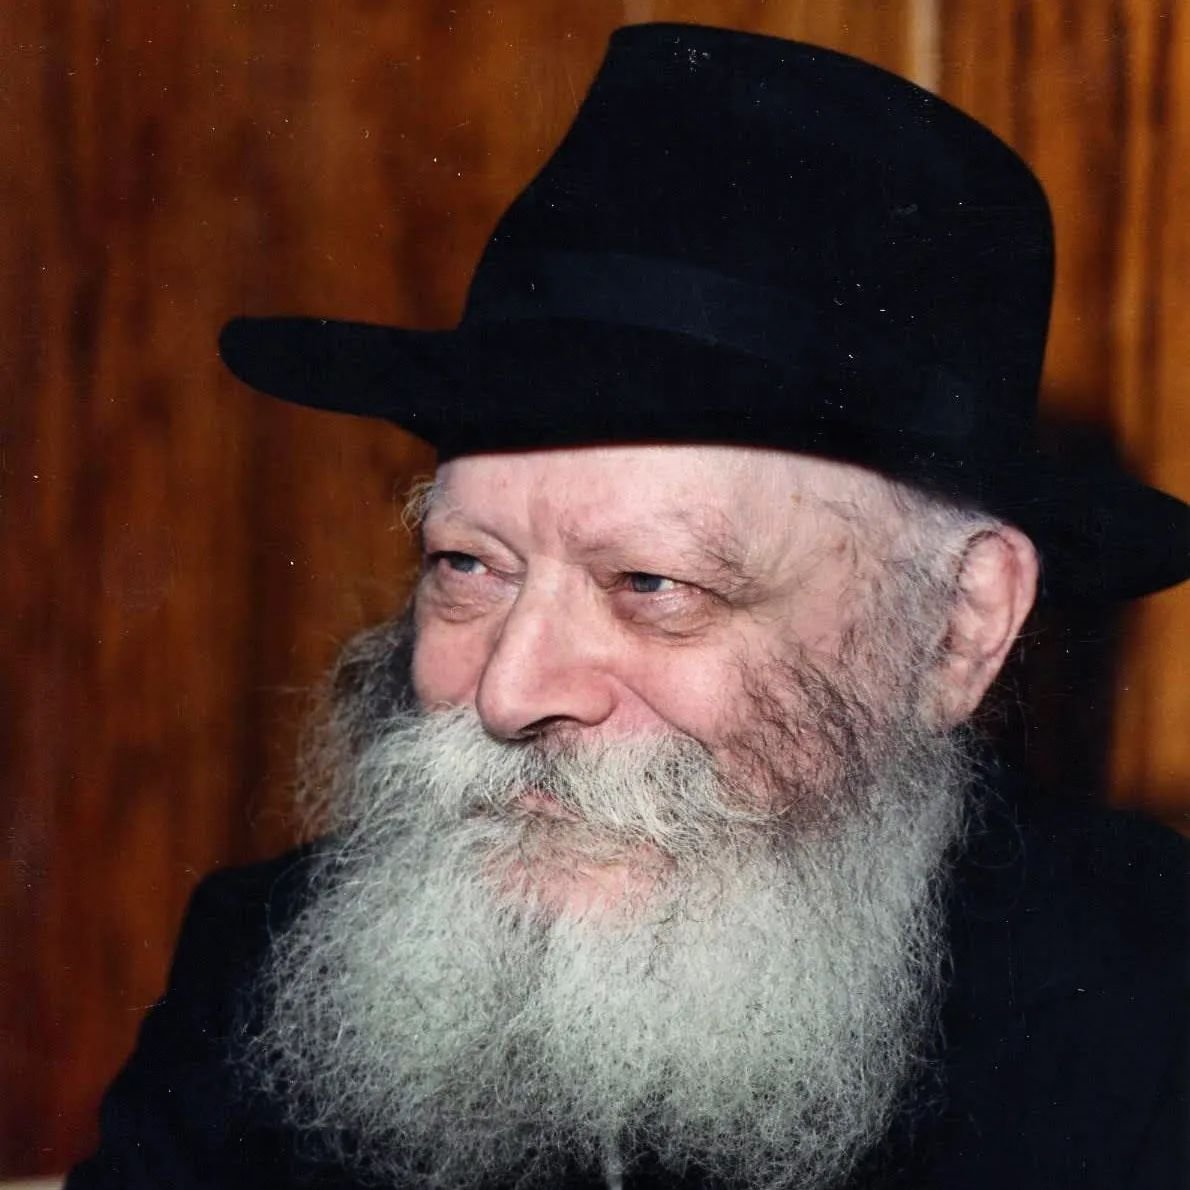 Today is the 11th Nissan, the birthday of the Lubavitcher Rebbe. 

The Rebbe was born in 1902 in Nikolaev, Russia. He moved at just six years old to Yekatrinislav, where his father Reb Levi Yitzchak was appointed Chief Rabbi of the city. 

On the 14t